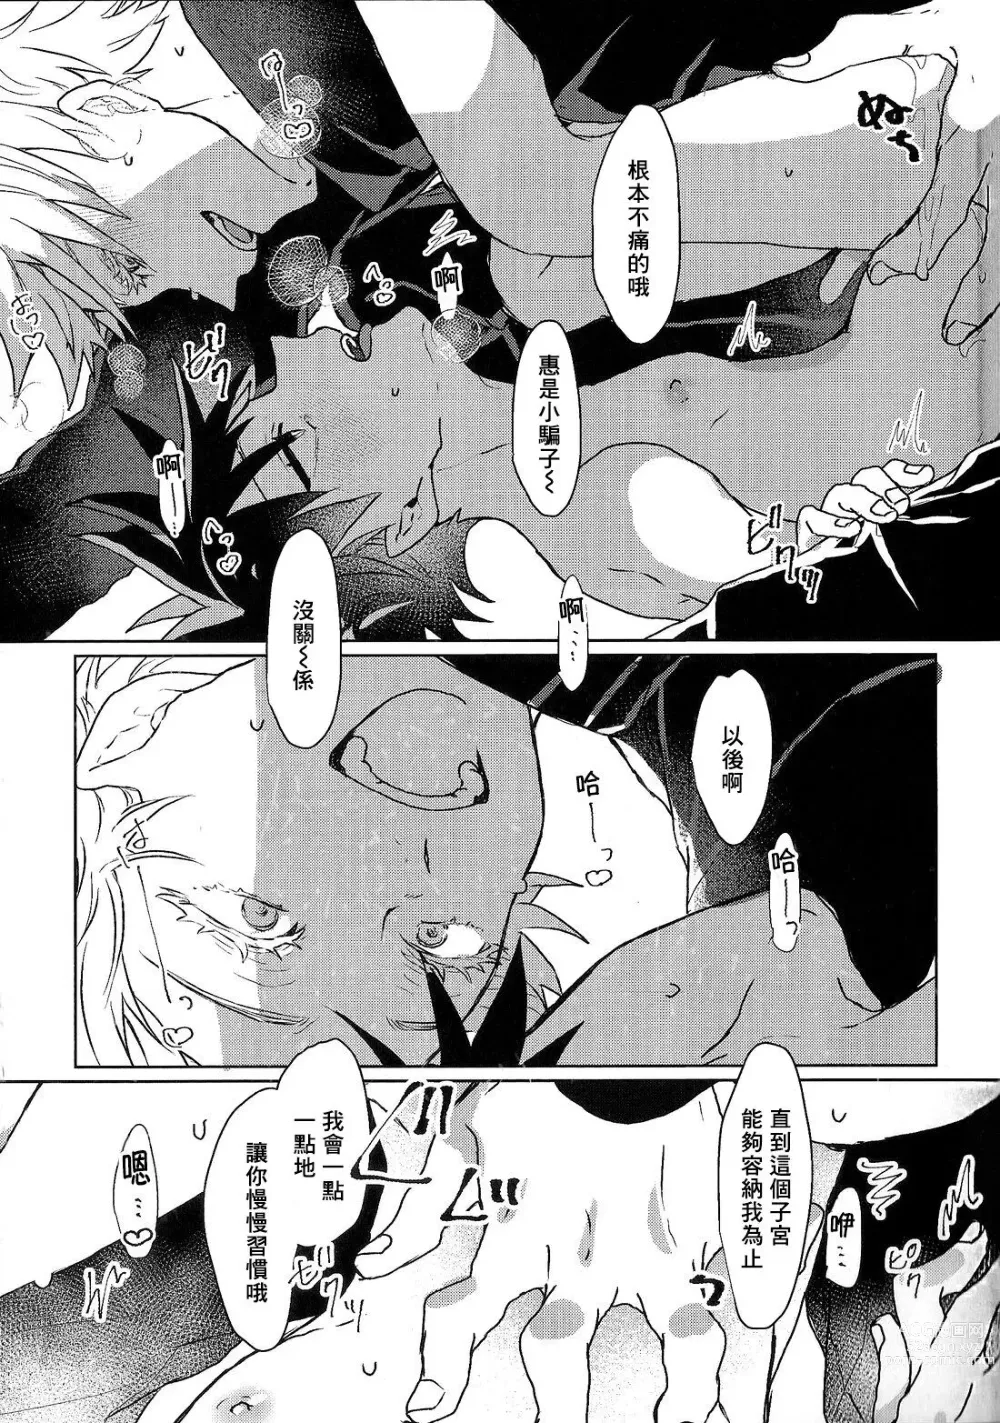 Page 13 of doujinshi Immoralist丨背德者